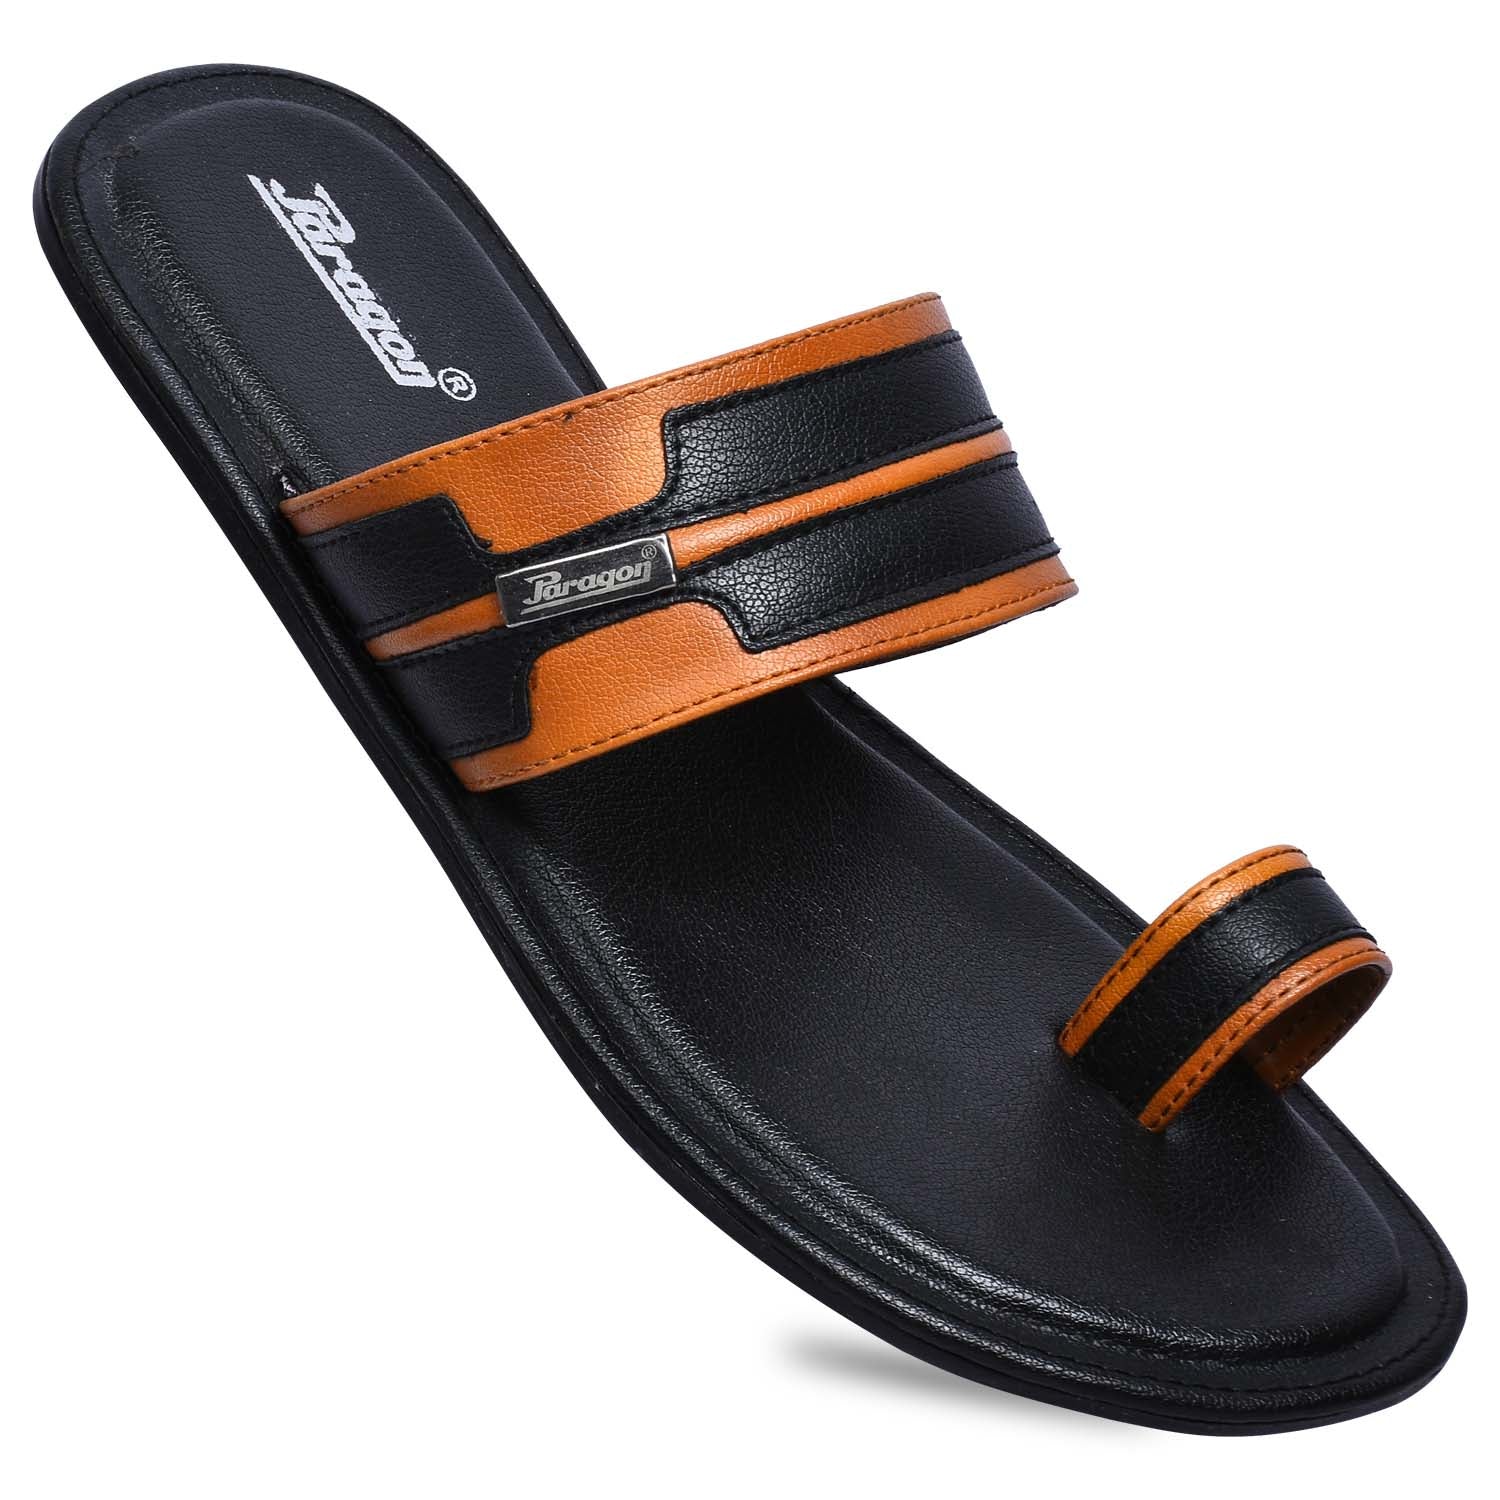 Paragon R4000G Men Stylish Sandals | Comfortable Sandals for Daily Outdoor Use | Casual Formal Sandals with Cushioned Soles